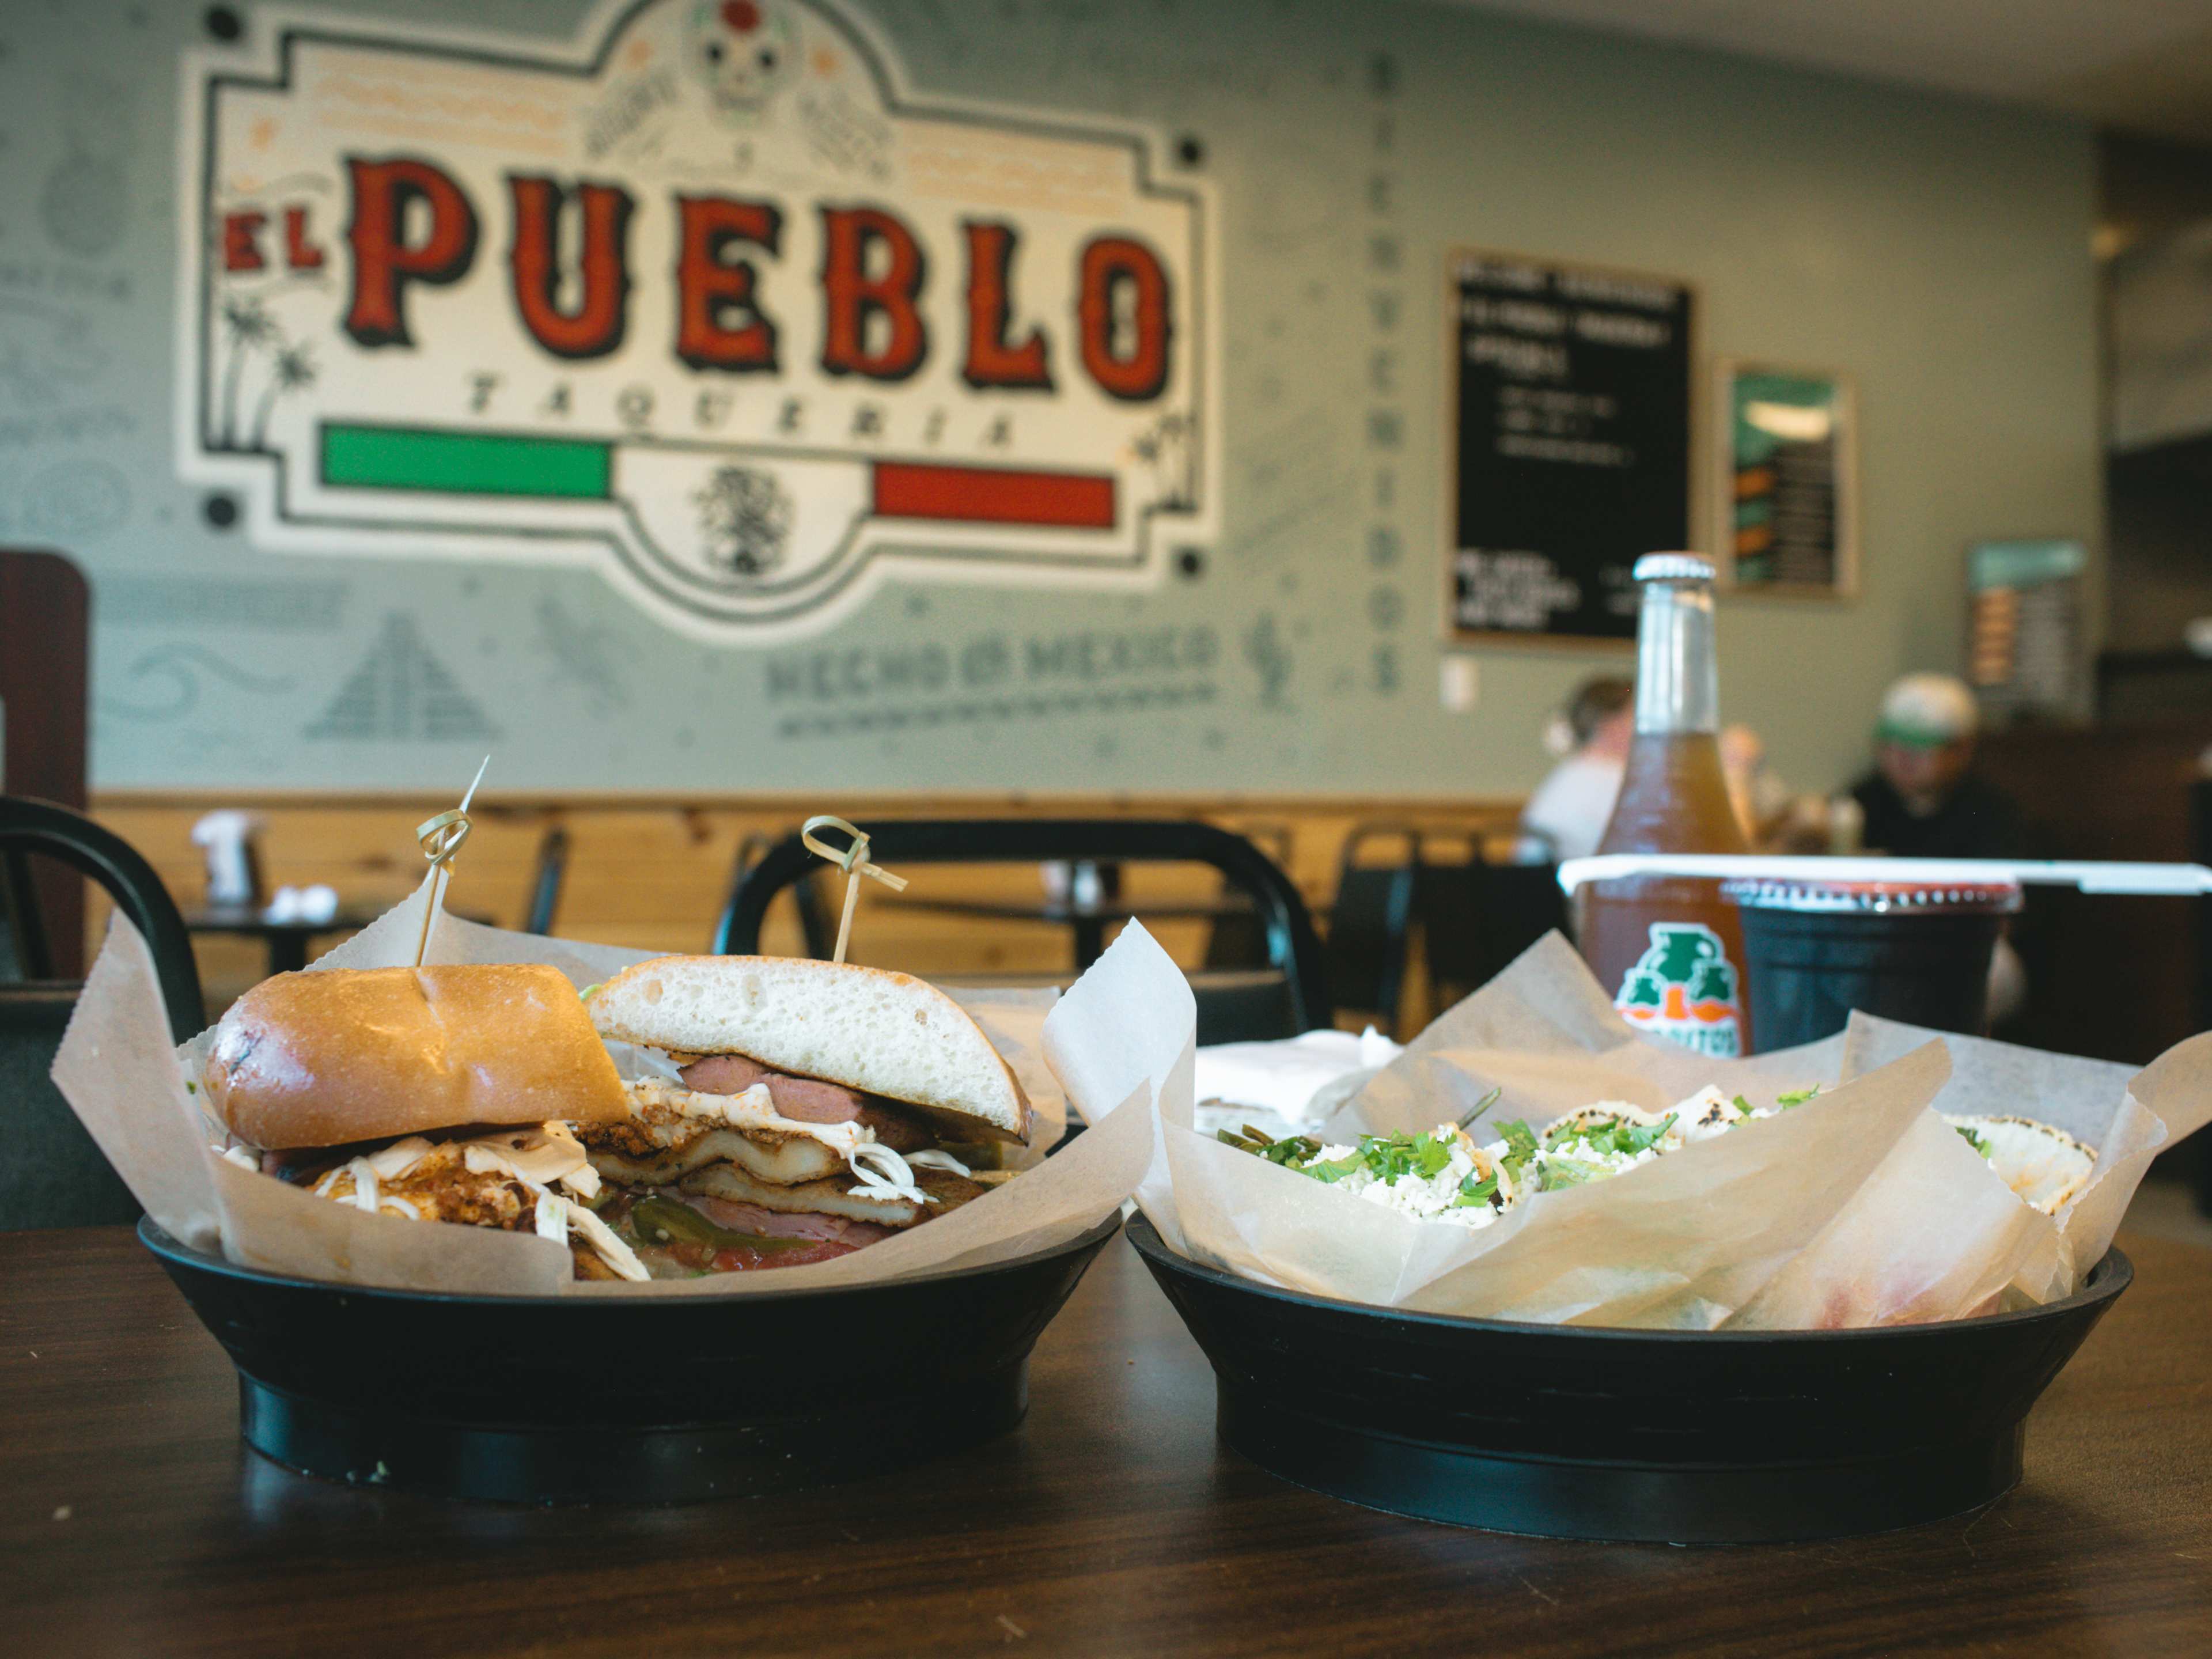 A torta and tacos on a table in front of a sign that says El Pueblo Taqueria